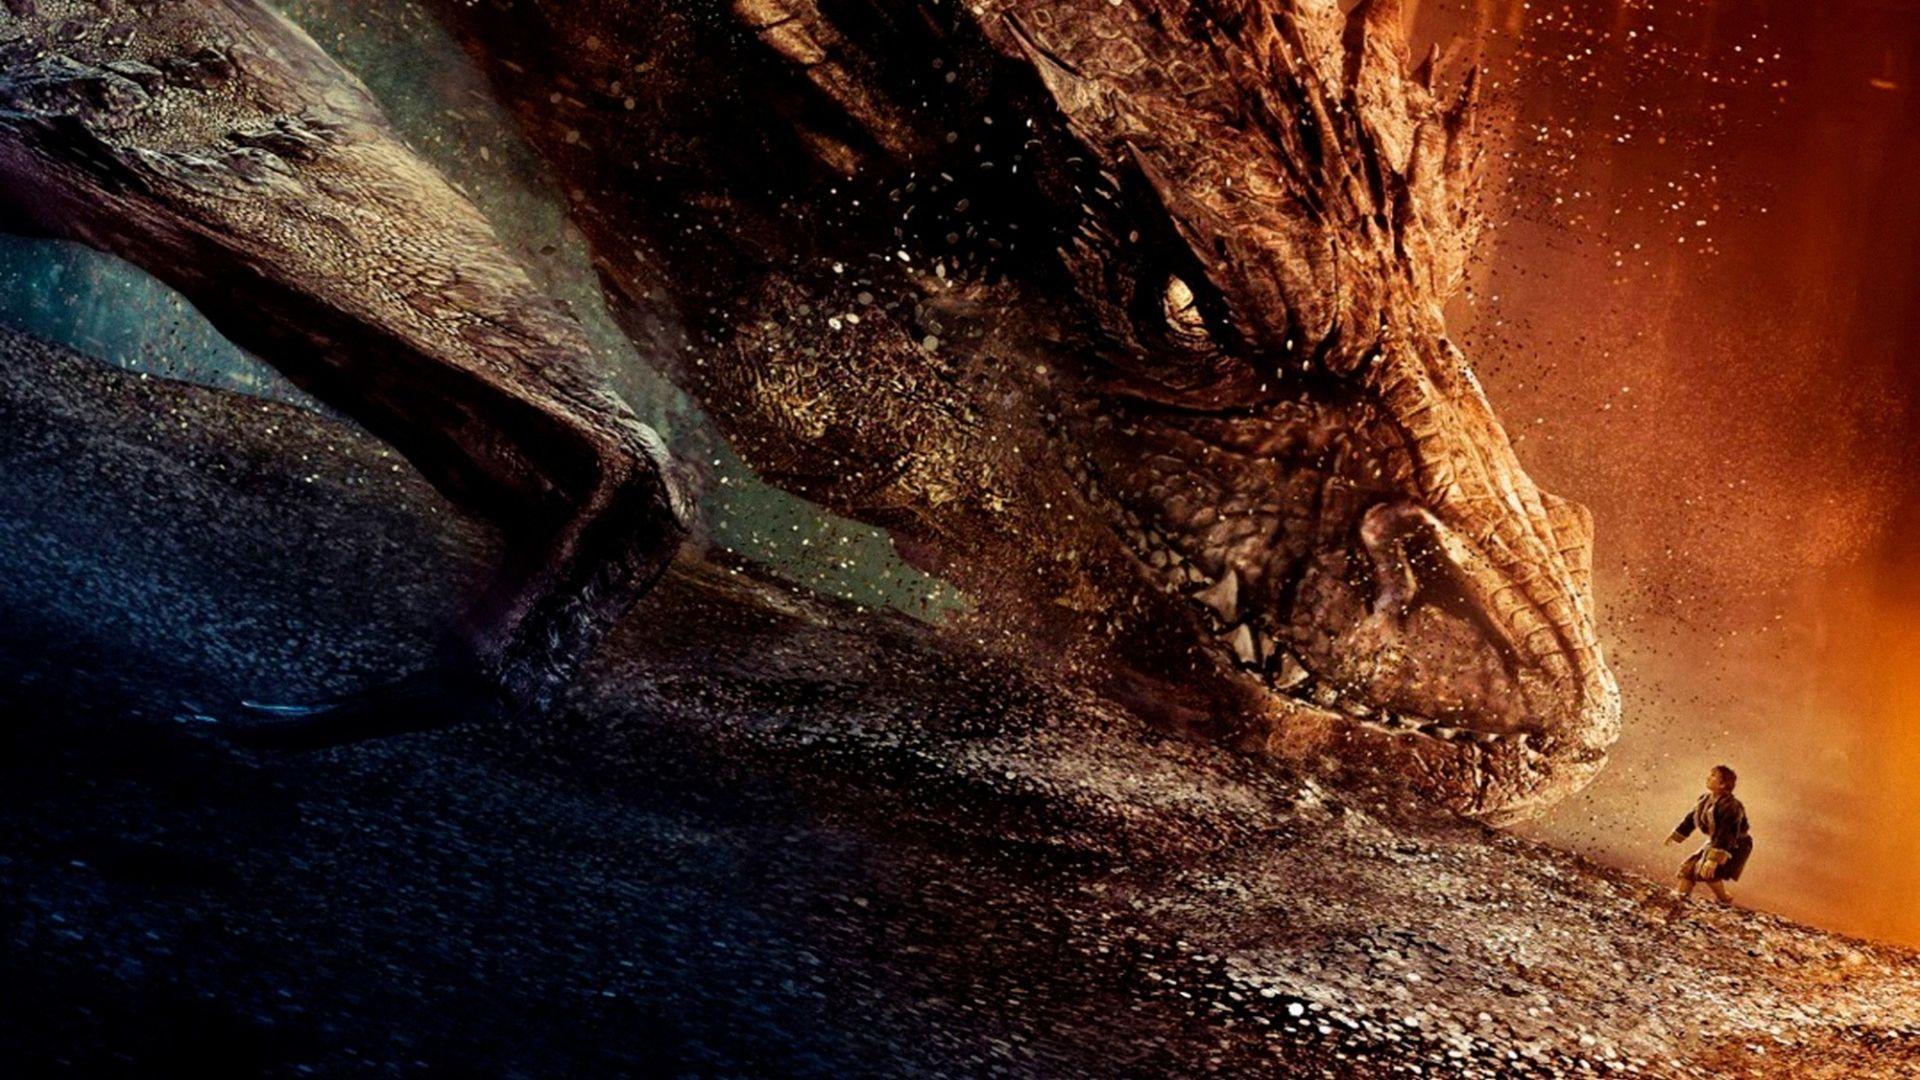 Download Eye of Smaug wallpaper by AdyDesign - e5 - Free on ZEDGE™ now.  Browse millions of popular 2015 Wallpapers and Ringtones … | The hobbit,  Smaug, Smaug dragon